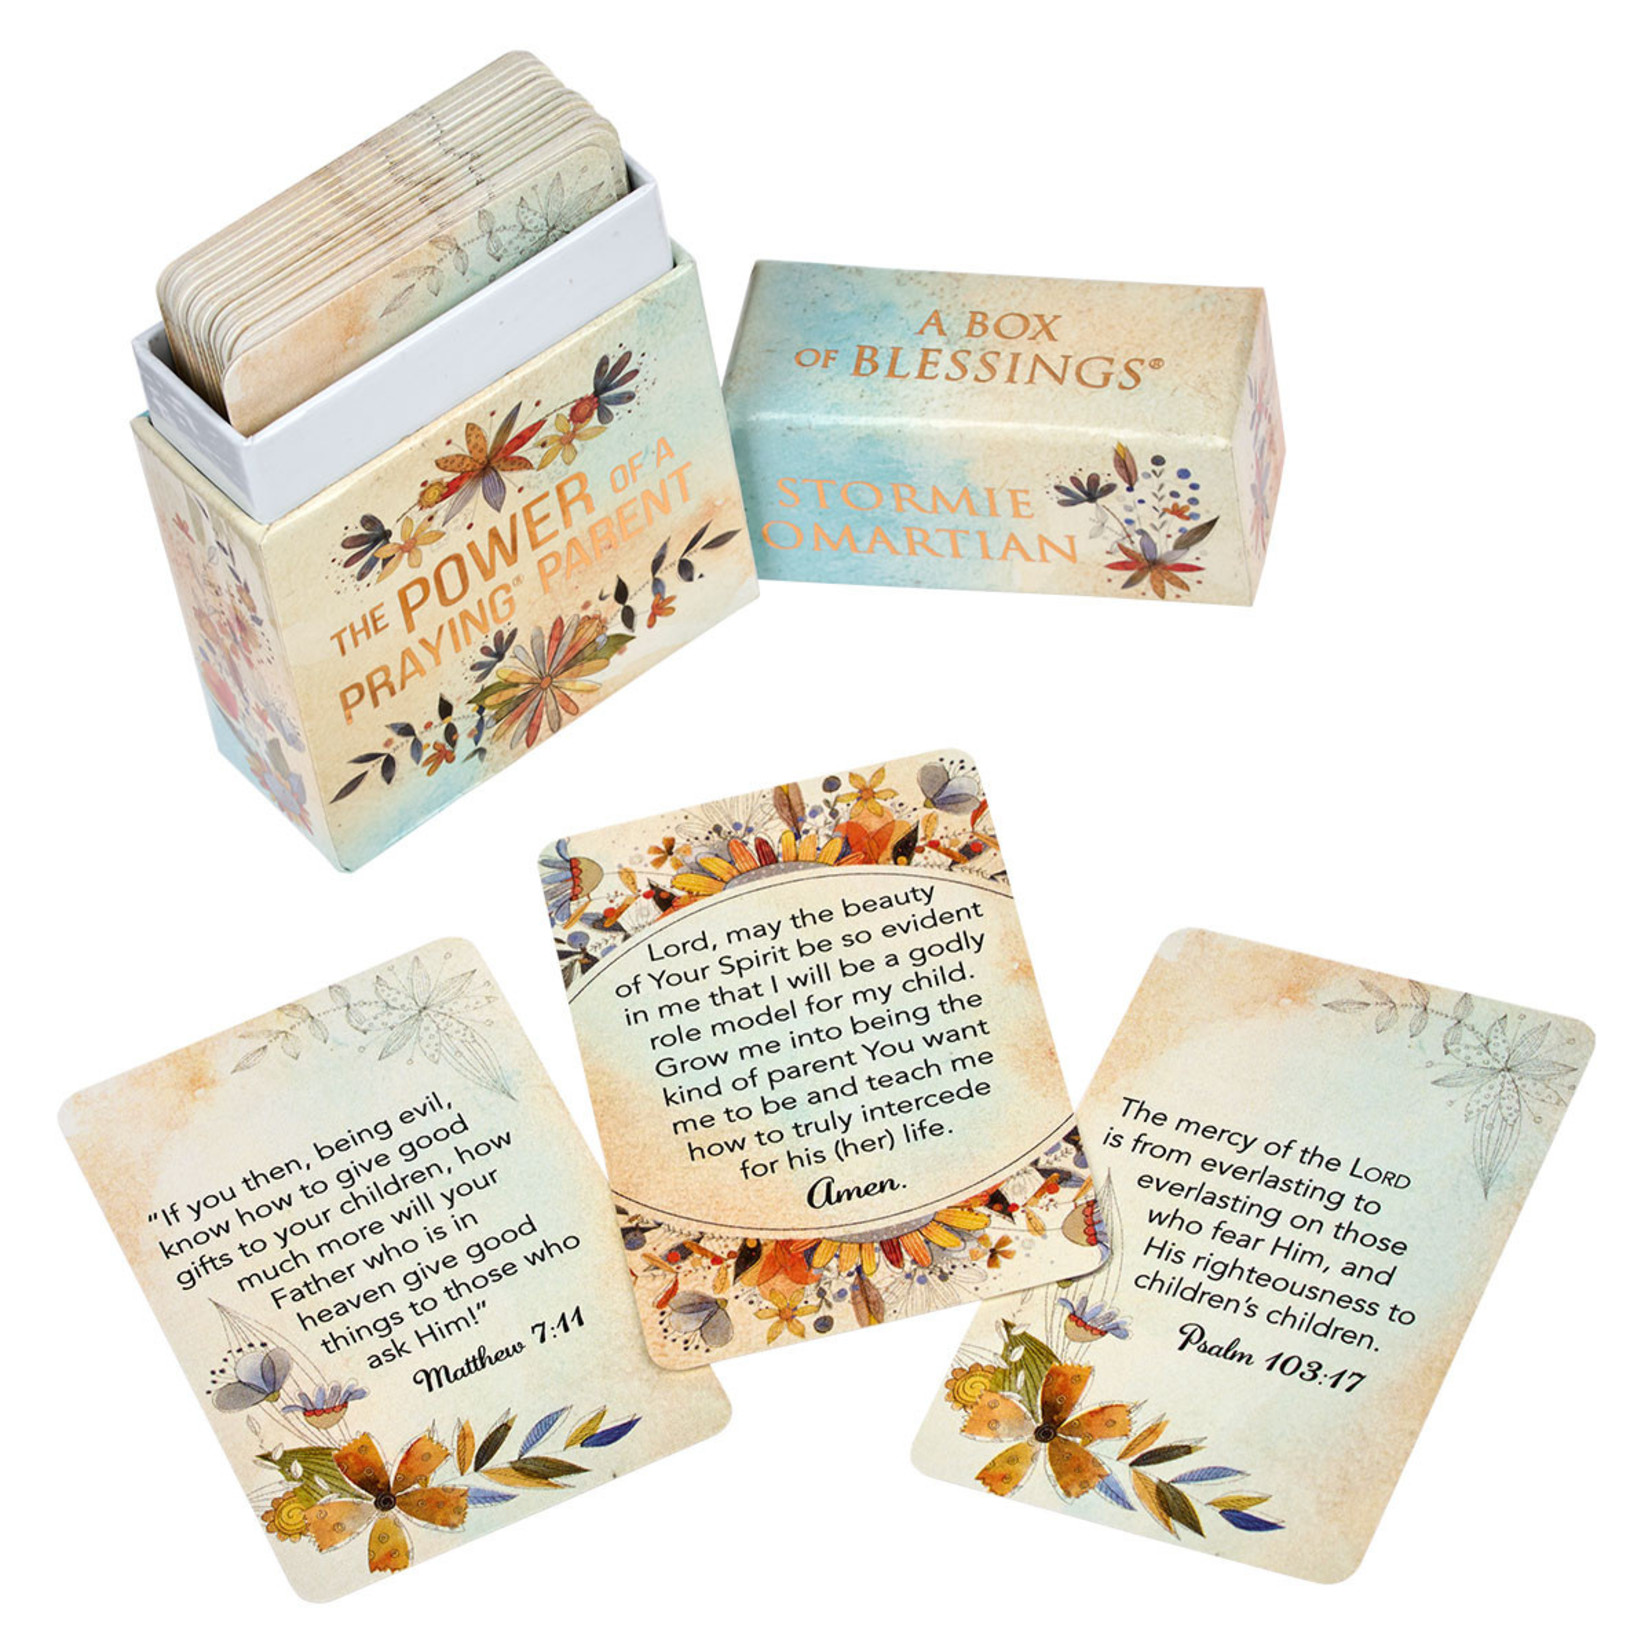 Christian Art Gifts The Power of a Praying Parent - Box of Blessings